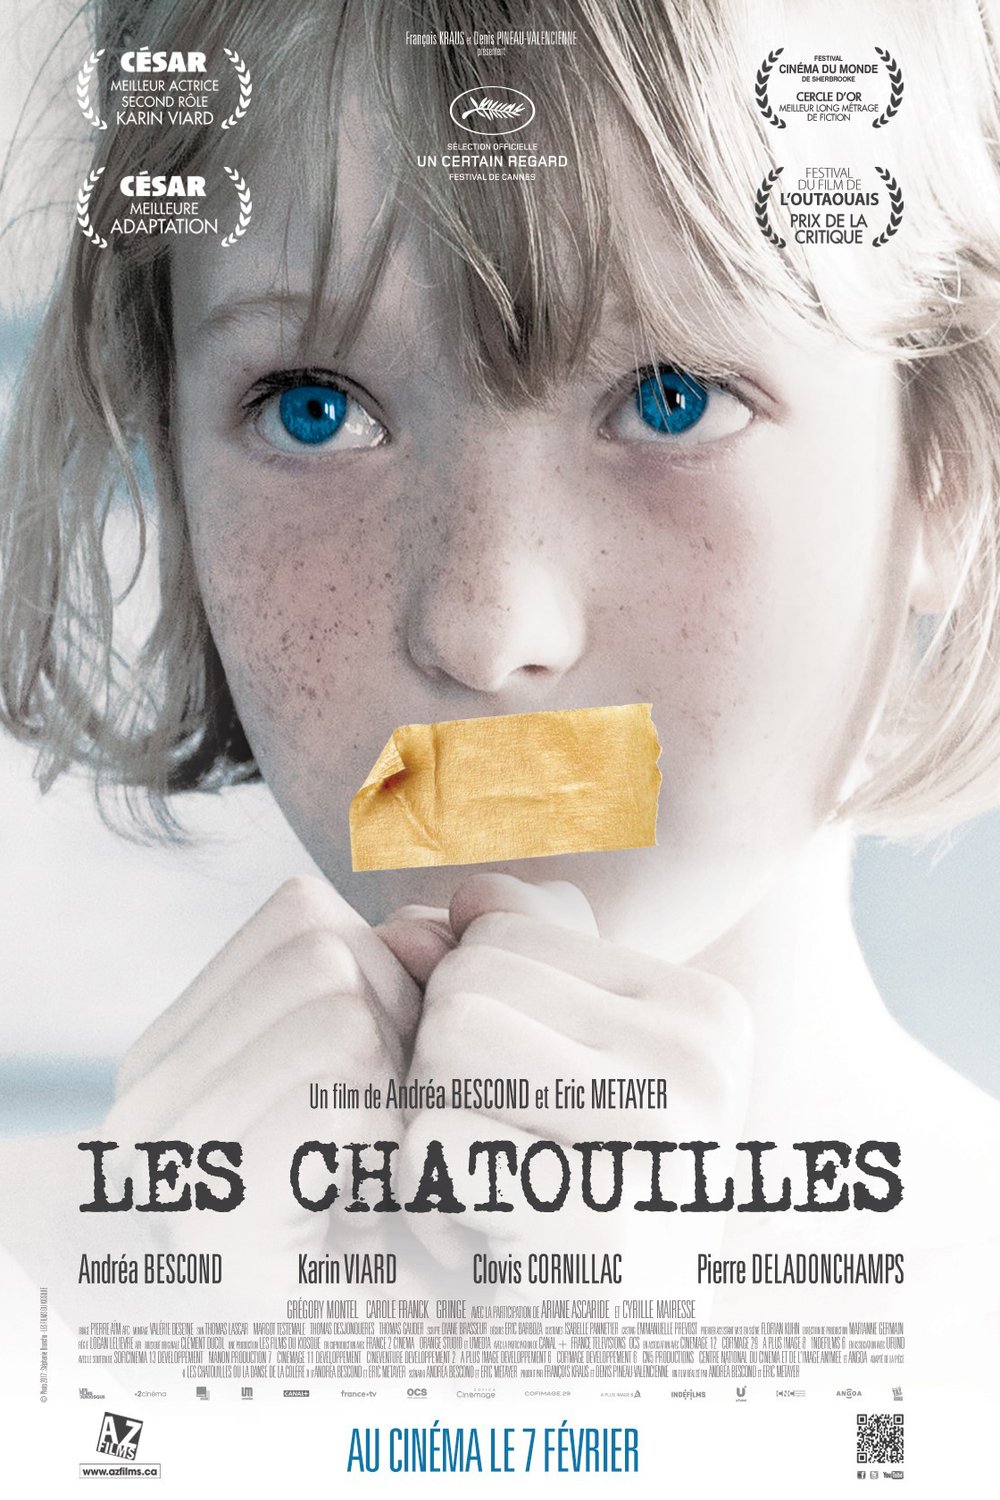 Poster of the movie Les Chatouilles